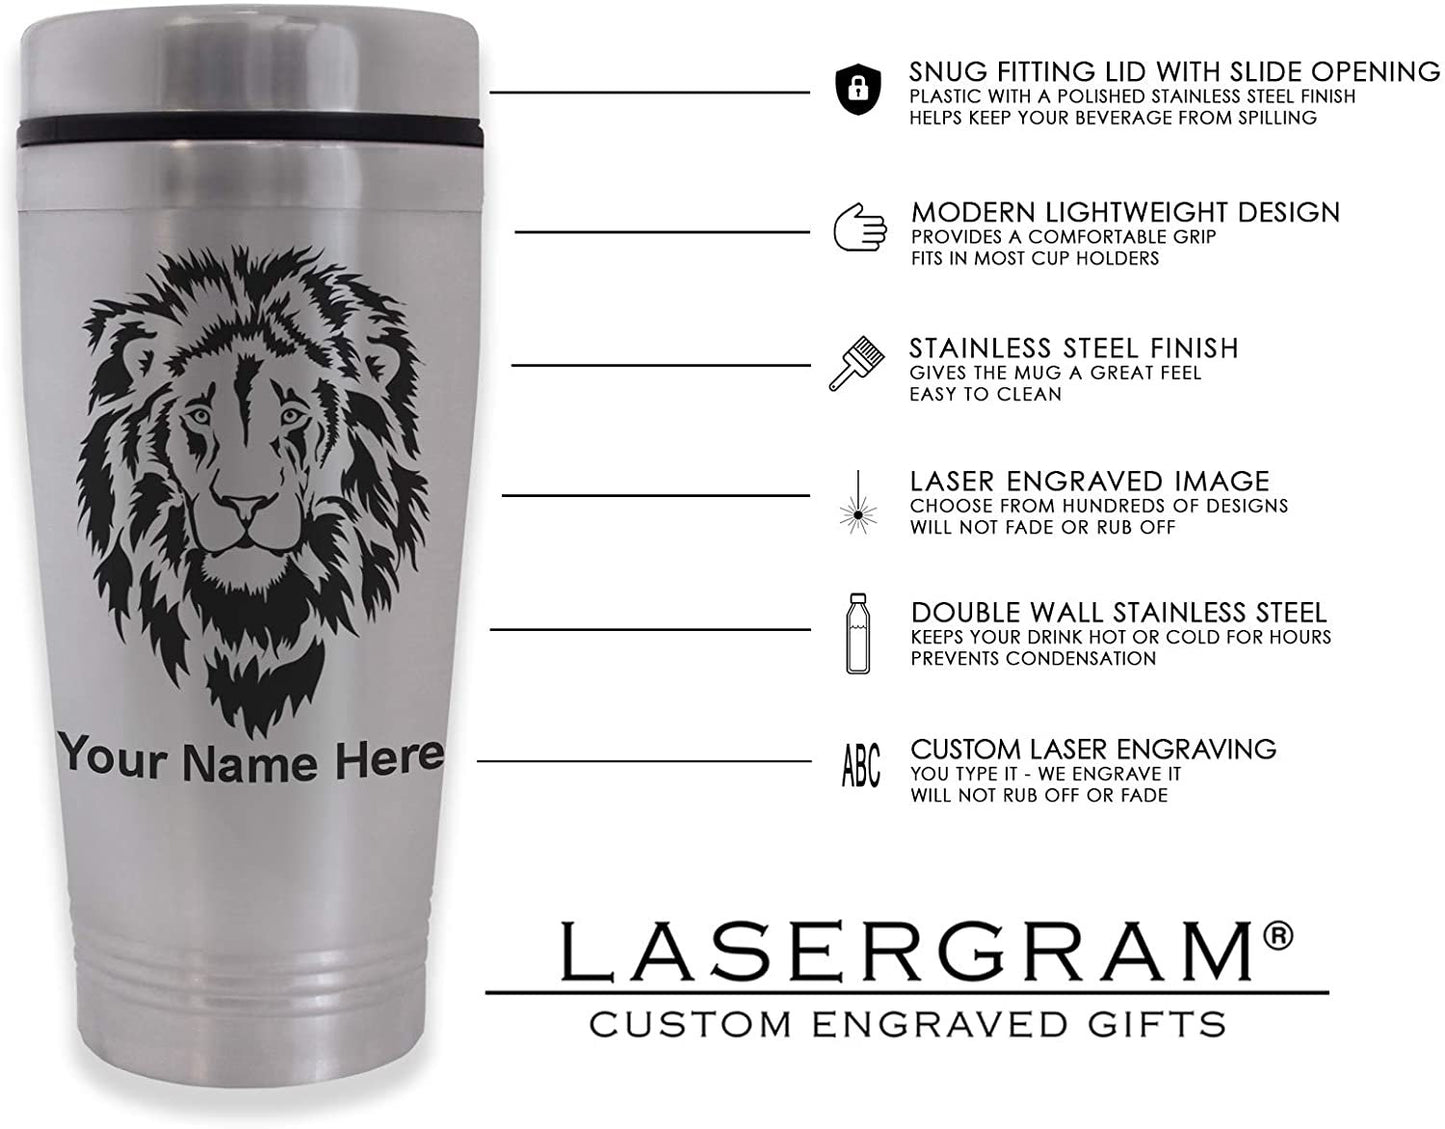 Commuter Travel Mug, Electric Guitar, Personalized Engraving Included